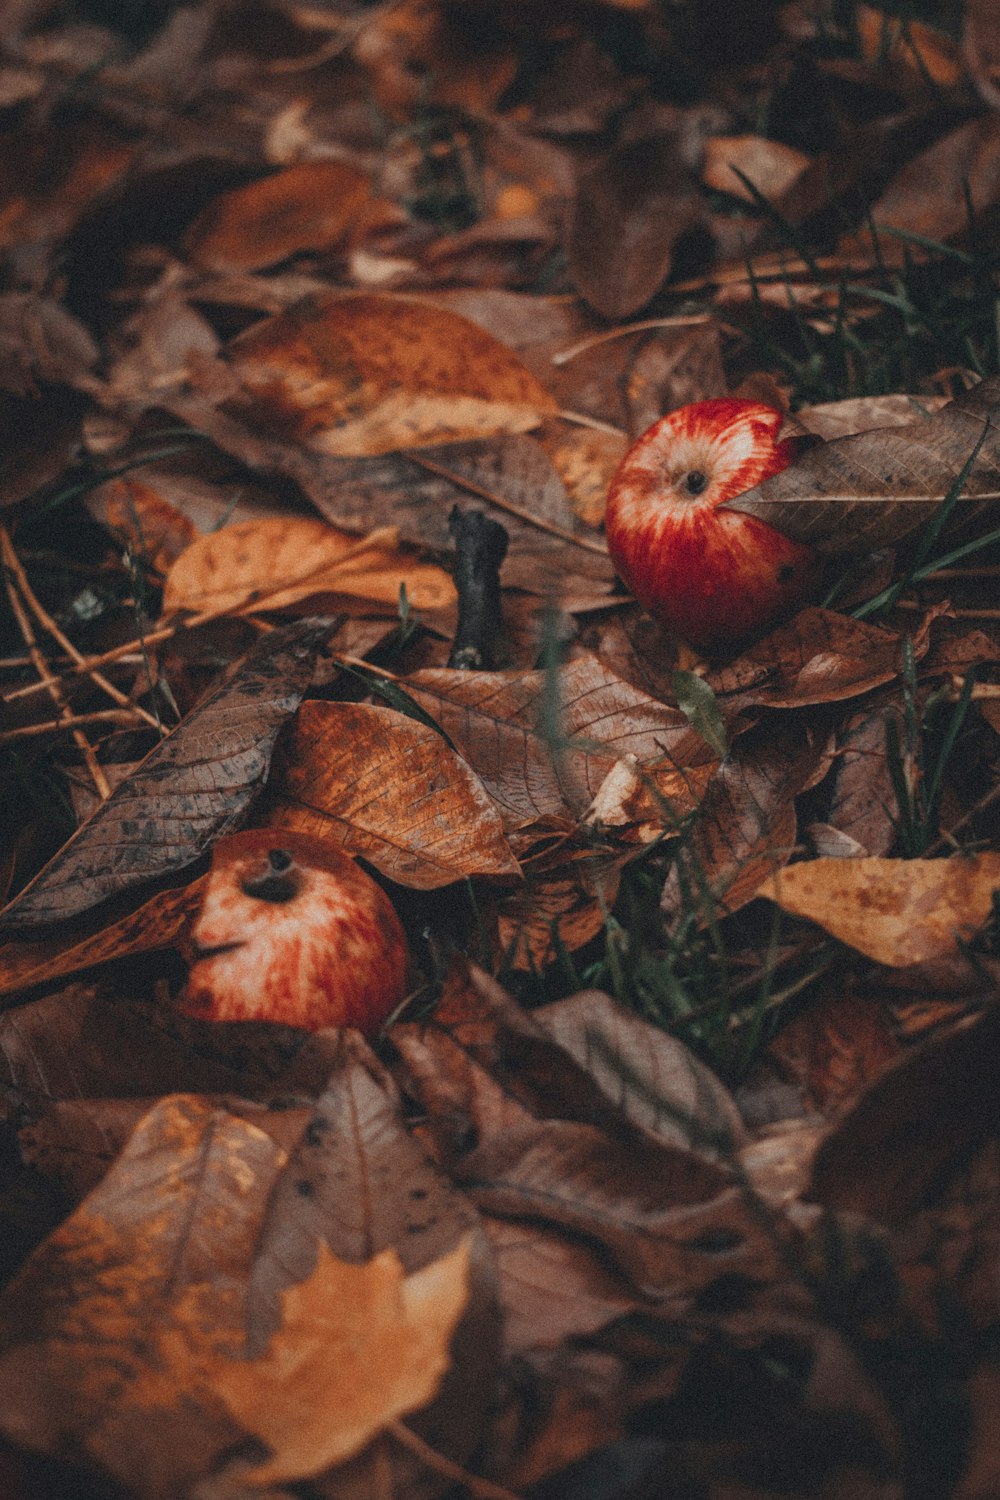 wilted fruits and leaves in the ground